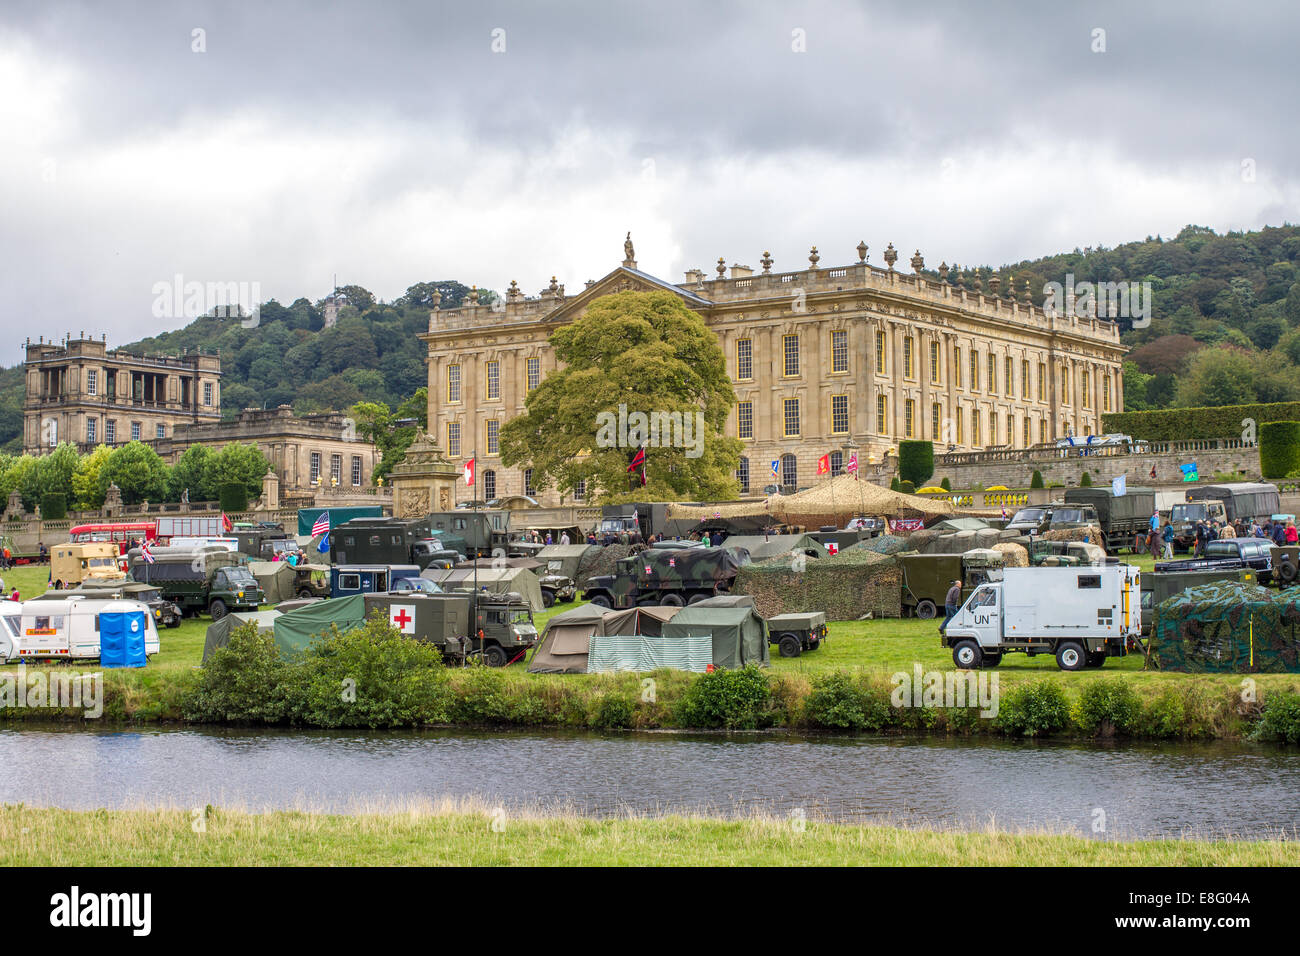 Military Vehicles at Chatsworth House Country Fair 2014 near Bakewell Derbyshire England UK Stock Photo